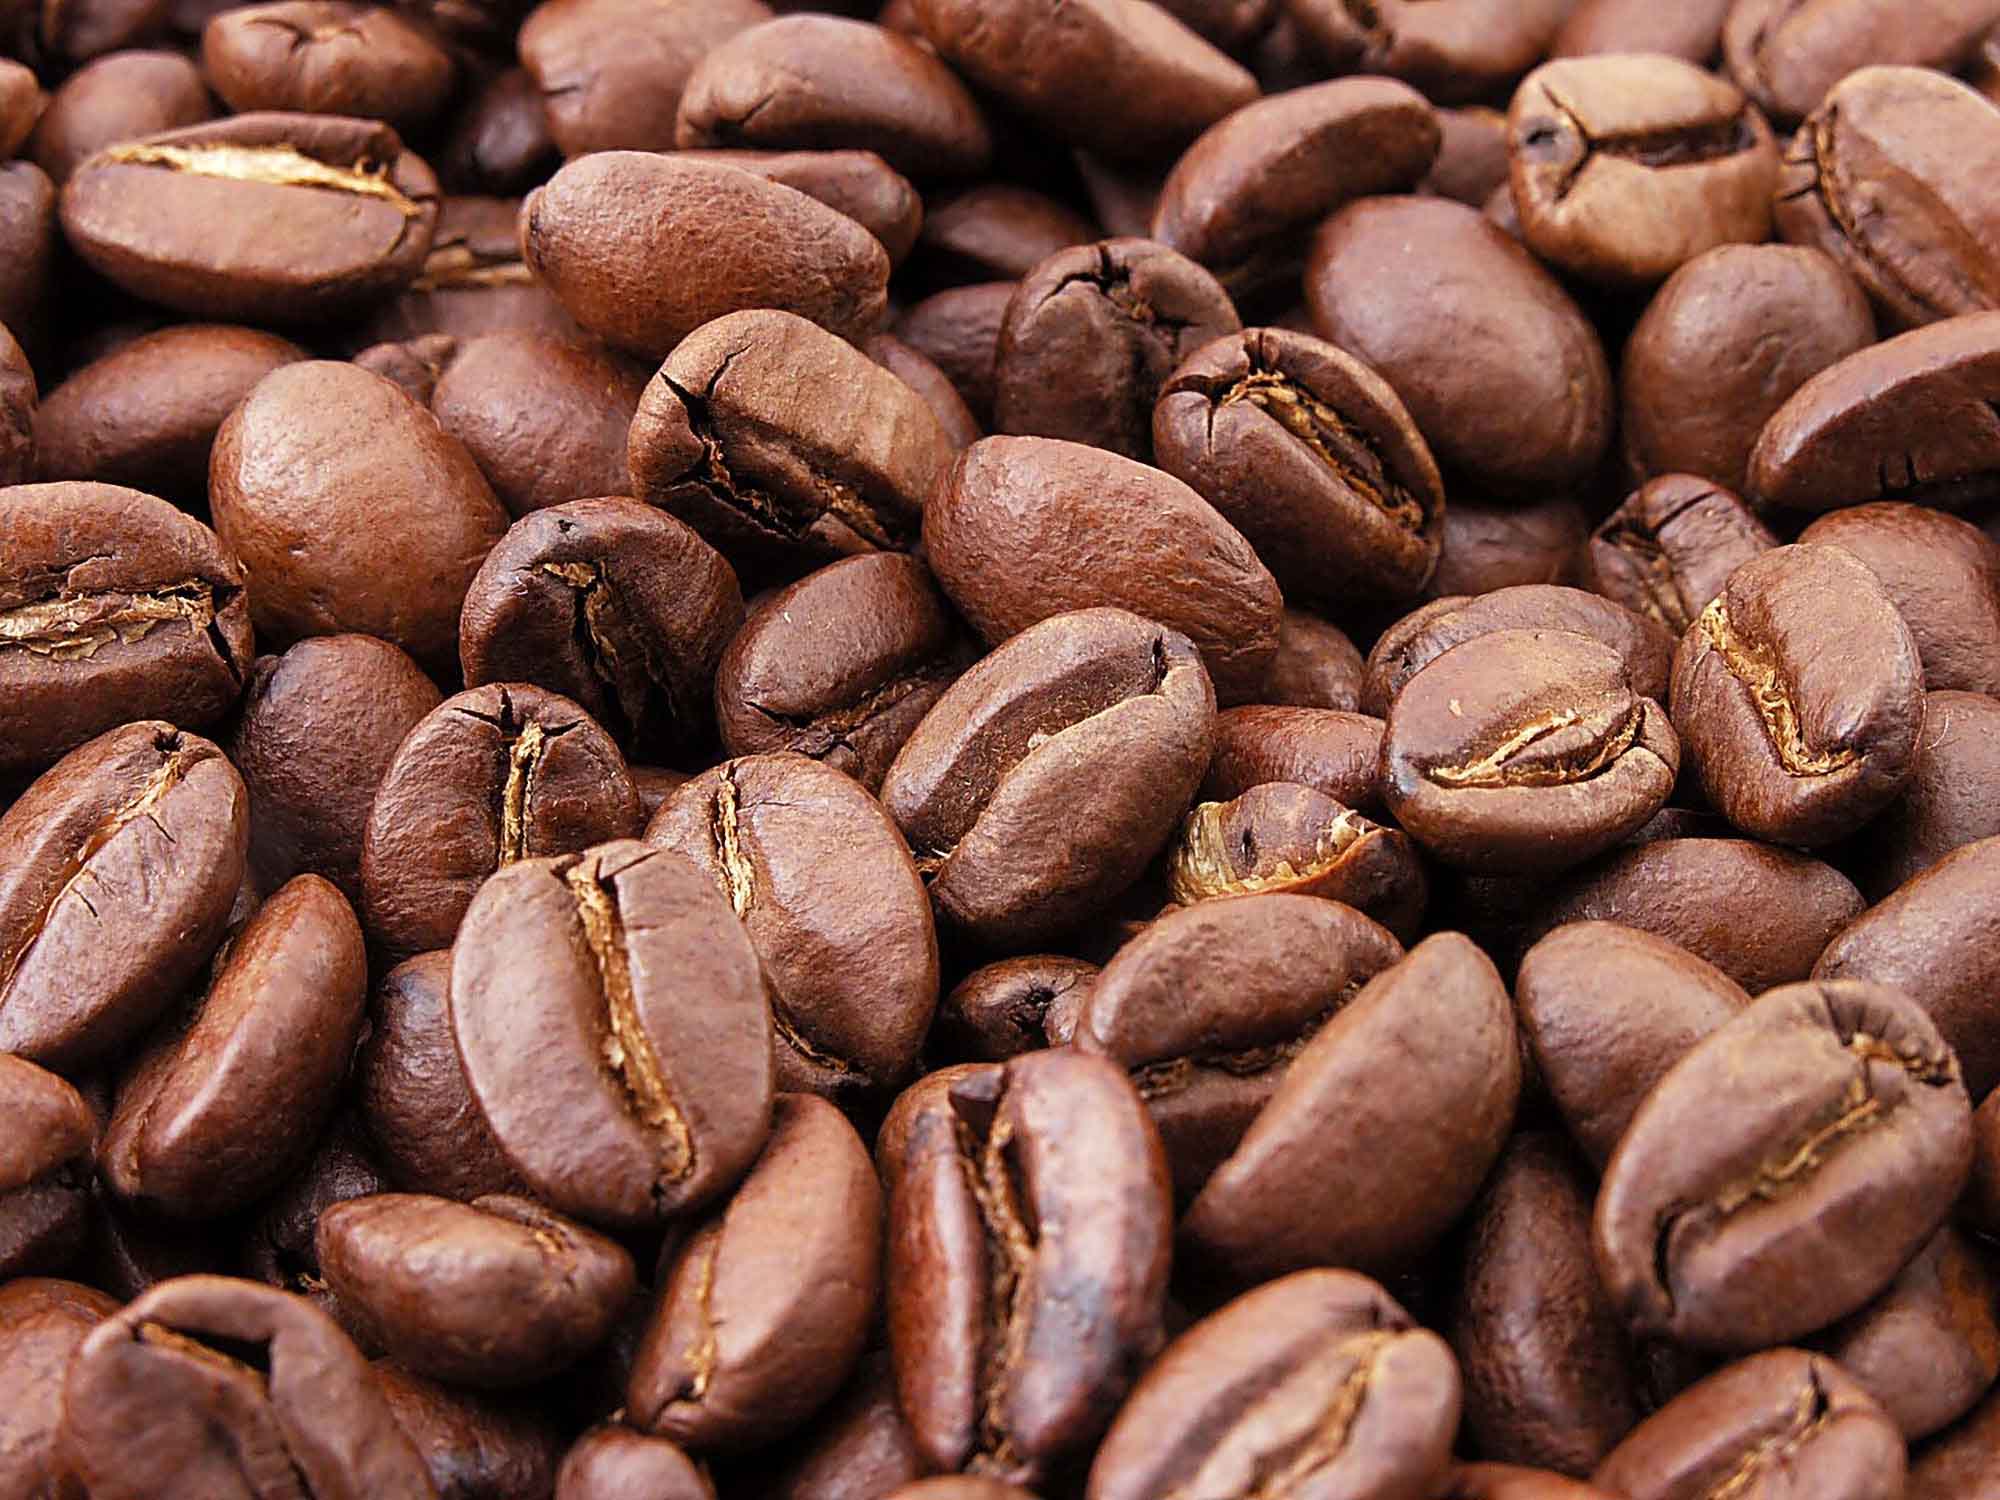 Higher Temperatures Could Spur Coffee Prices, Pollination…